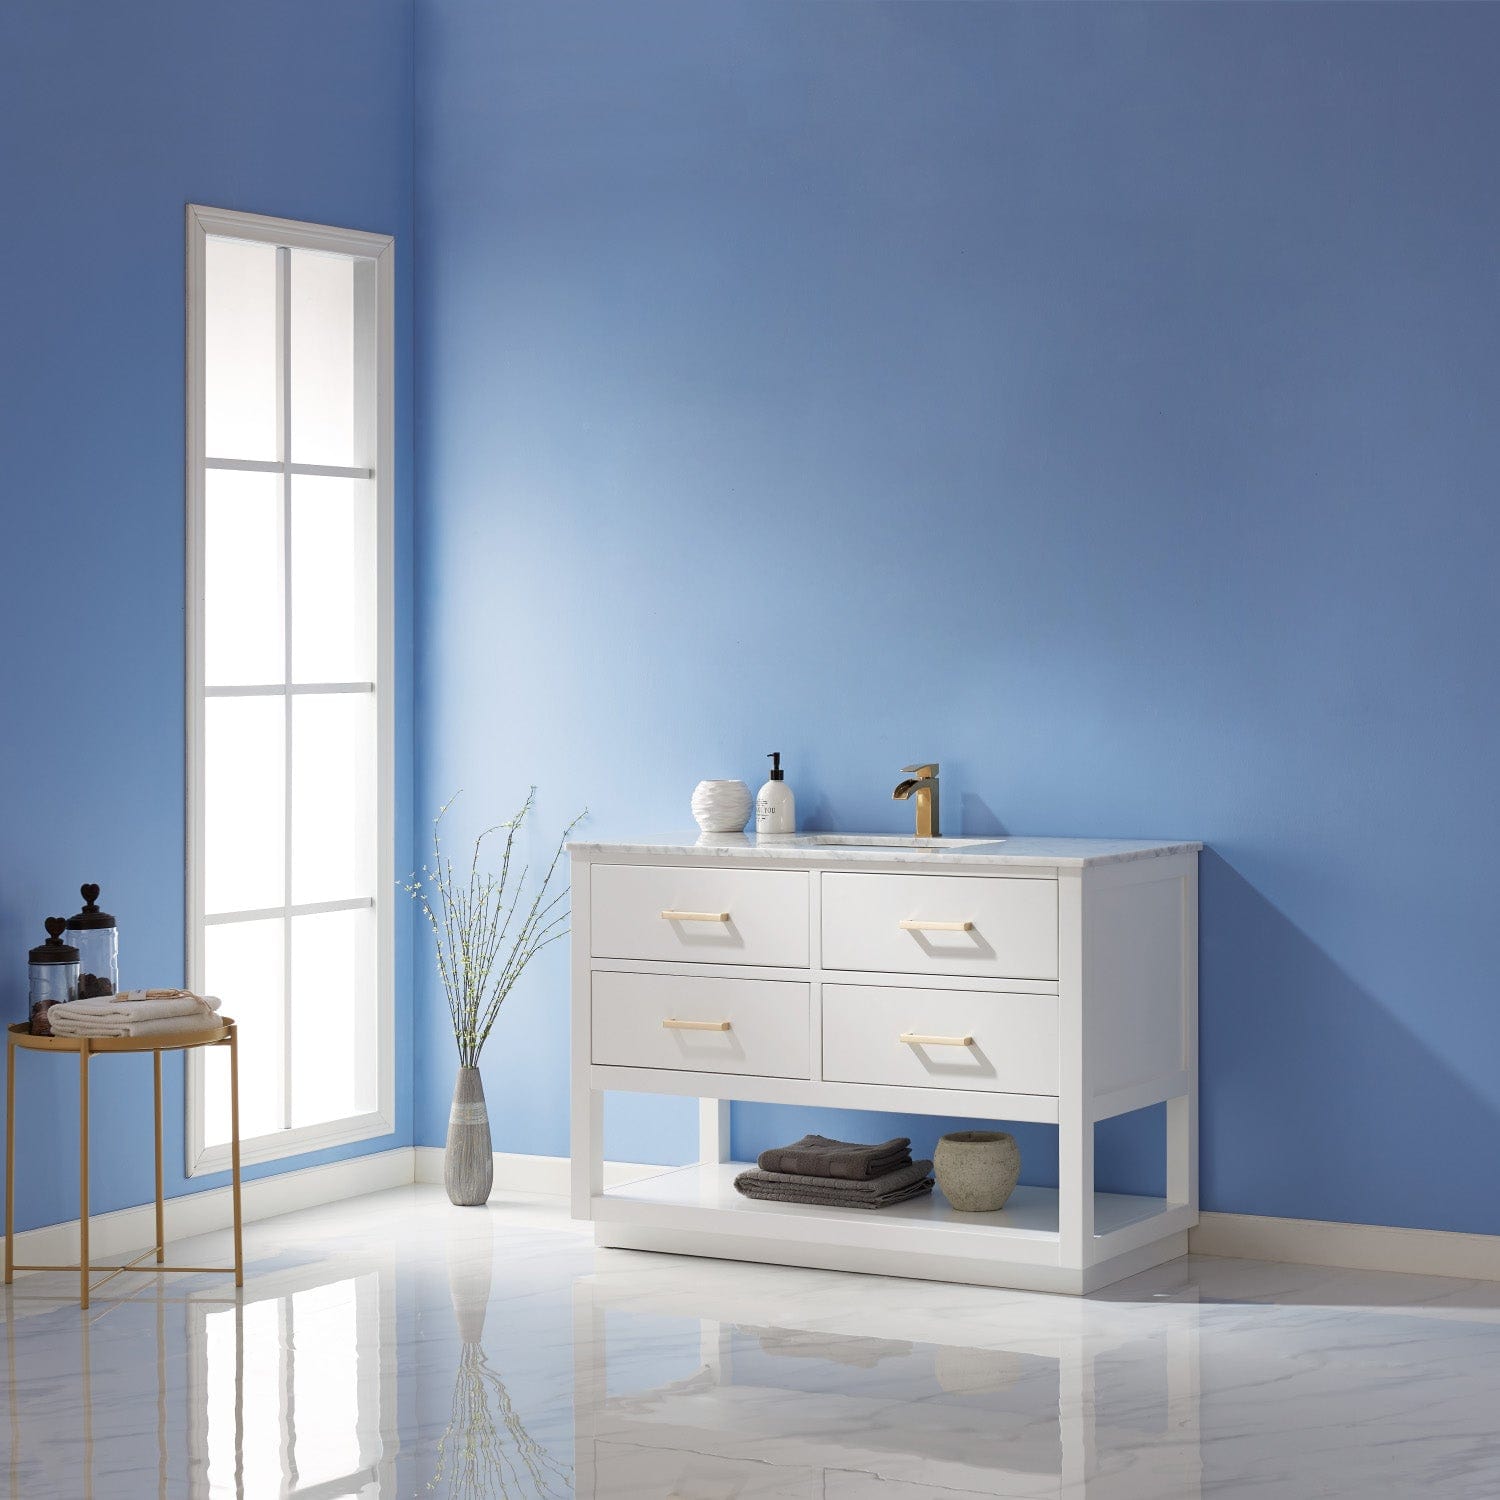 Altair Remi 48" Single Bathroom Vanity Set in White and Carrara White Marble Countertop without Mirror 532048-WH-CA-NM - Molaix631112971508Vanity532048-WH-CA-NM